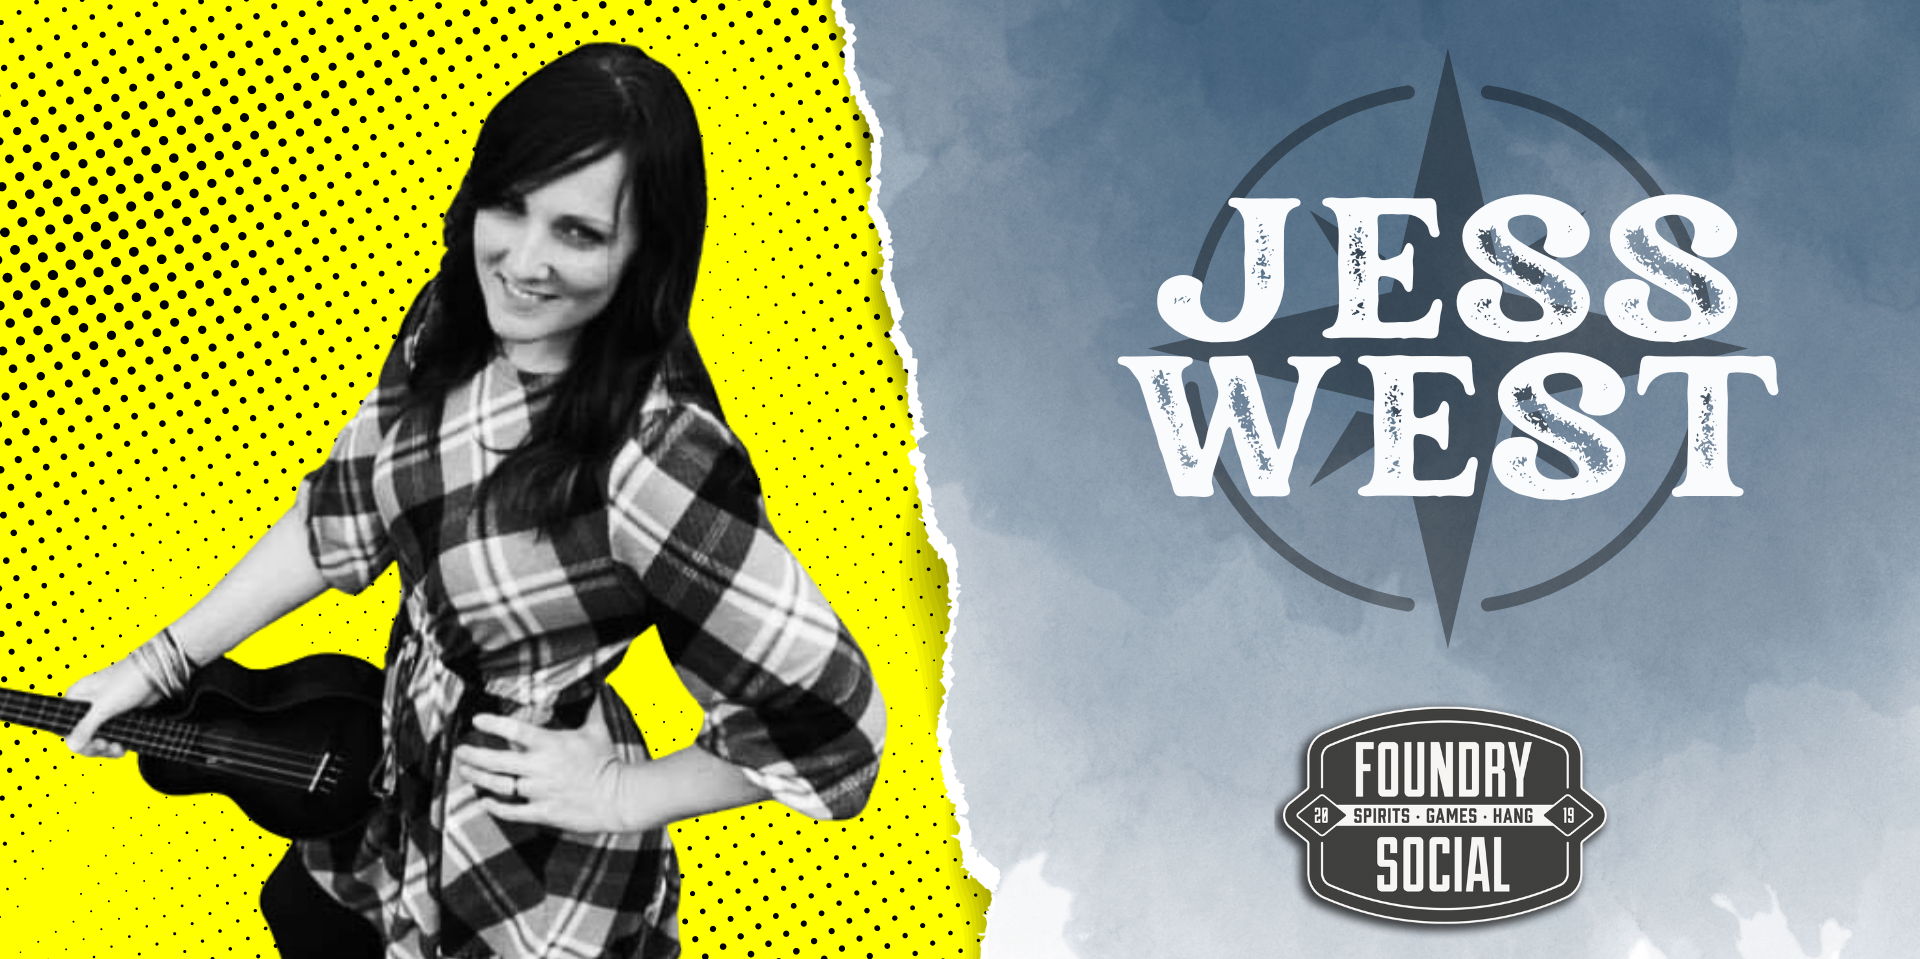 Jess West LIVE at Foundry Social promotional image